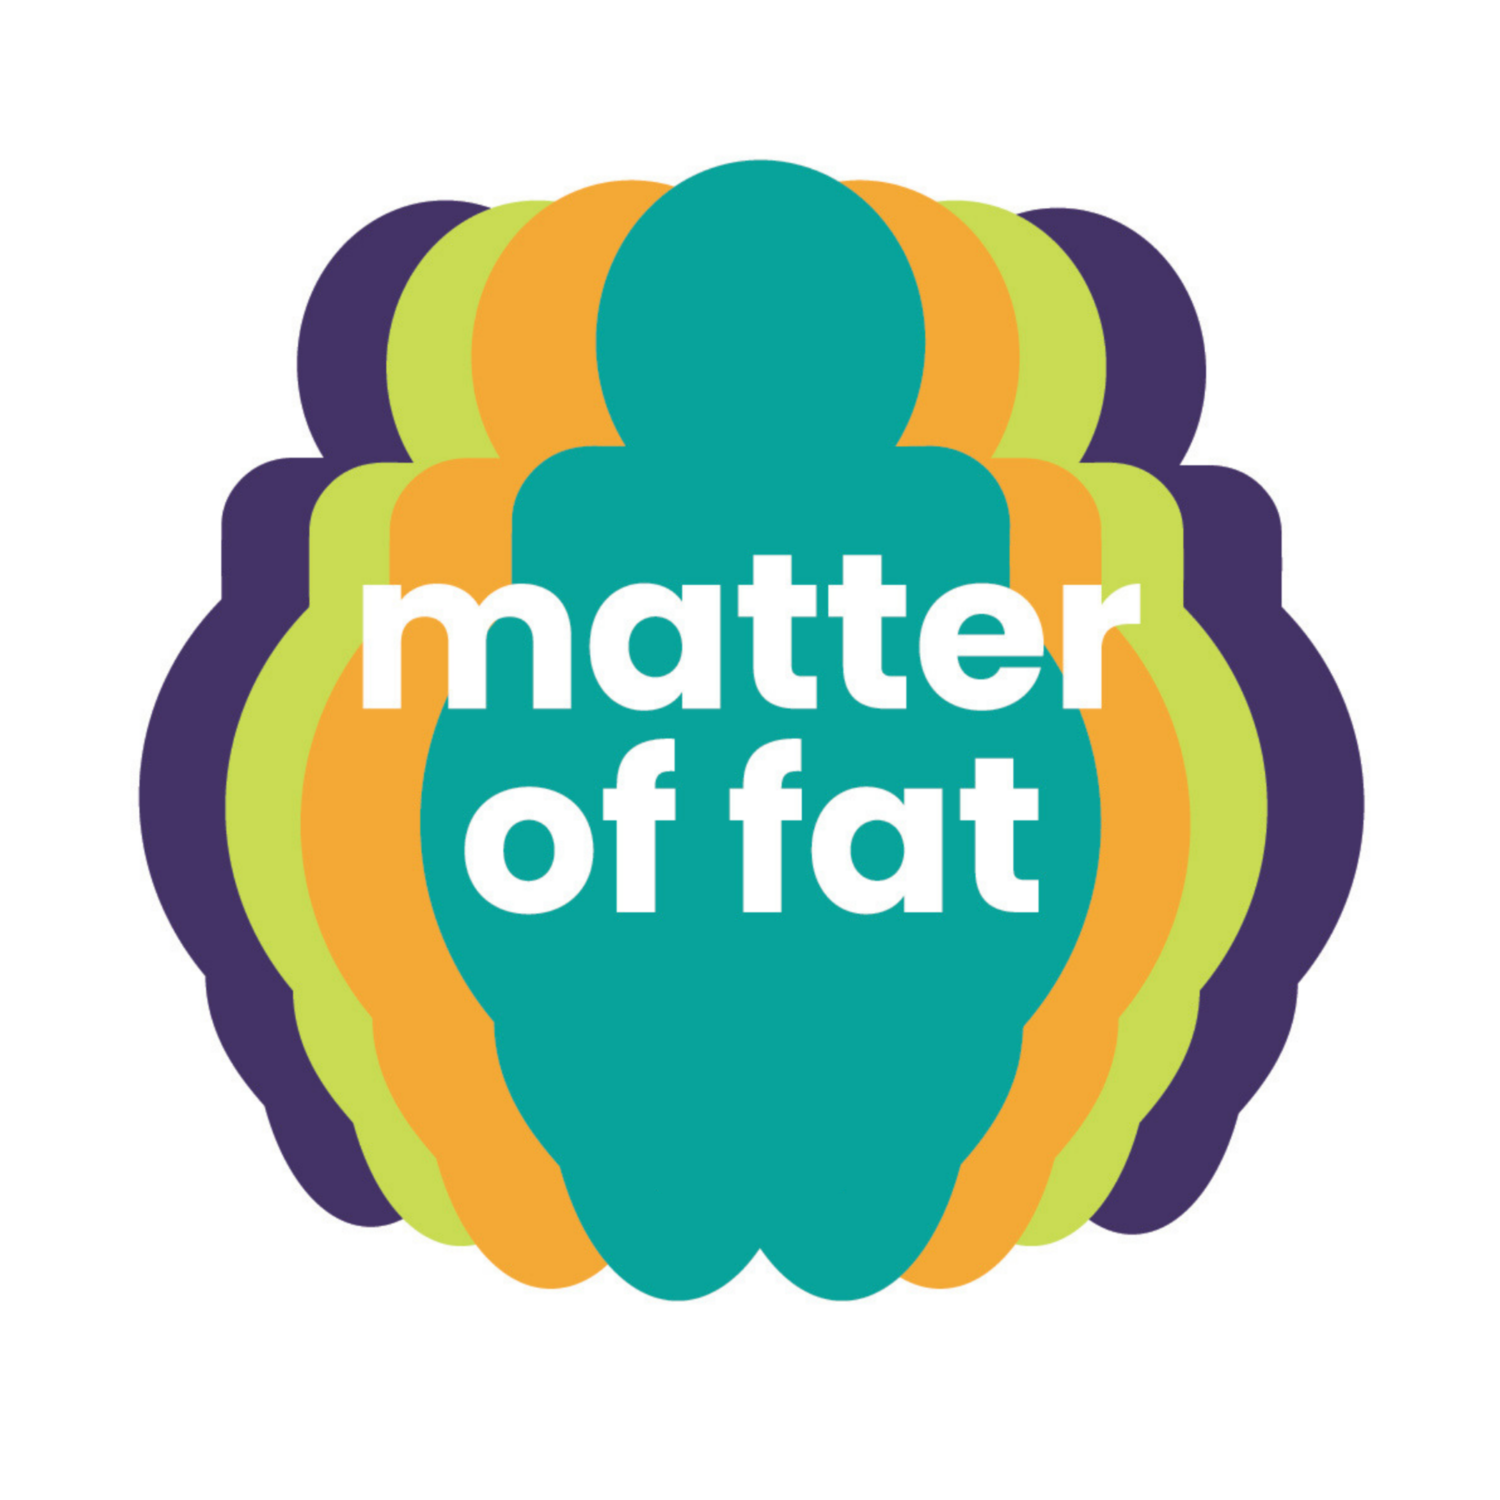 Matter of fat podcast